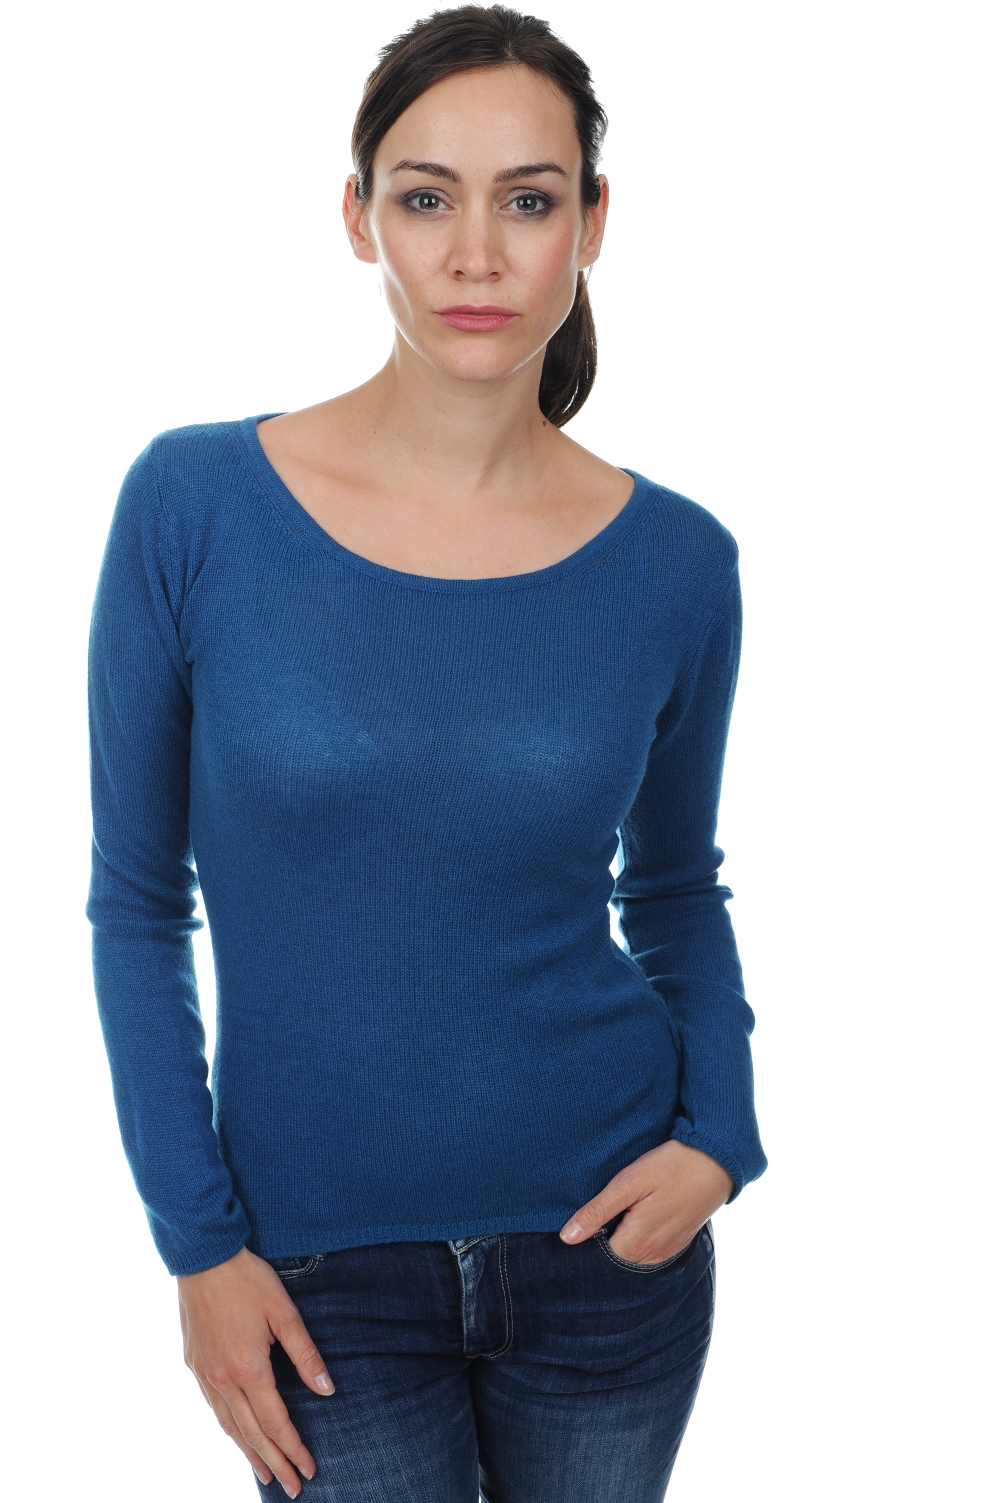 Cashmere ladies basic sweaters at low prices caleen canard blue m